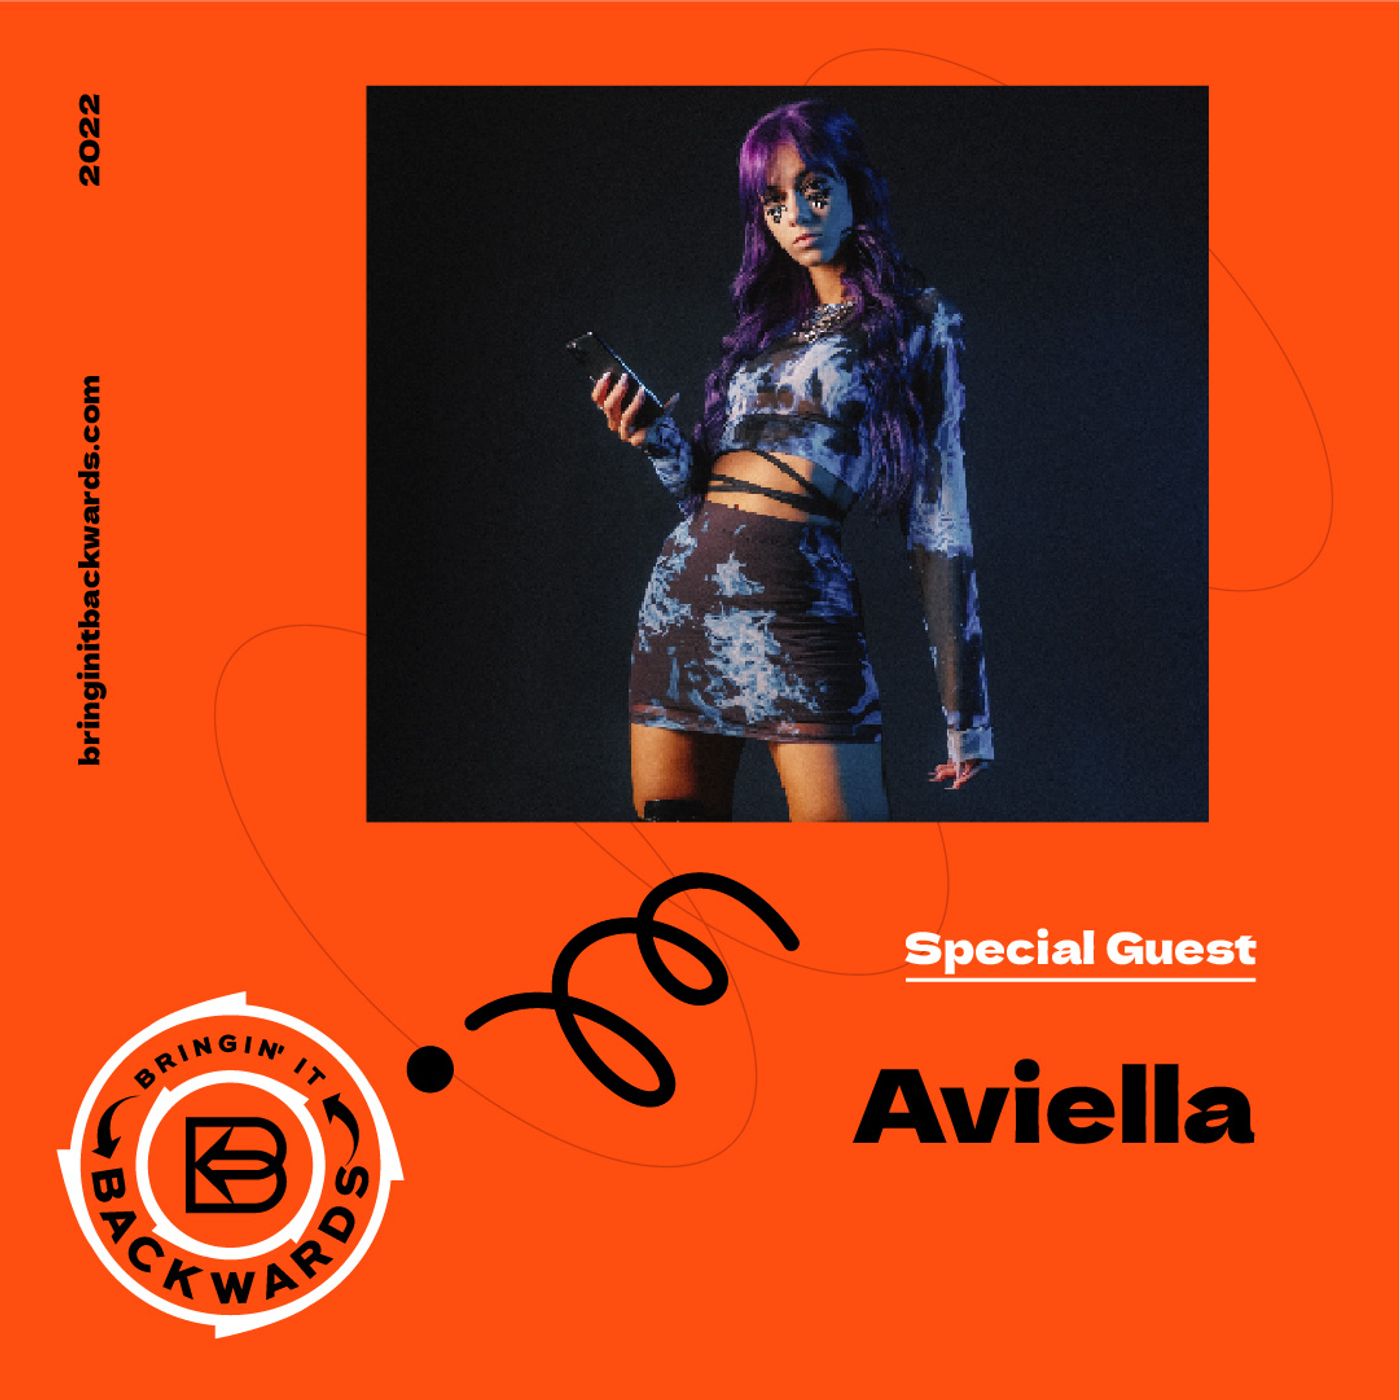 Interview with Aviella